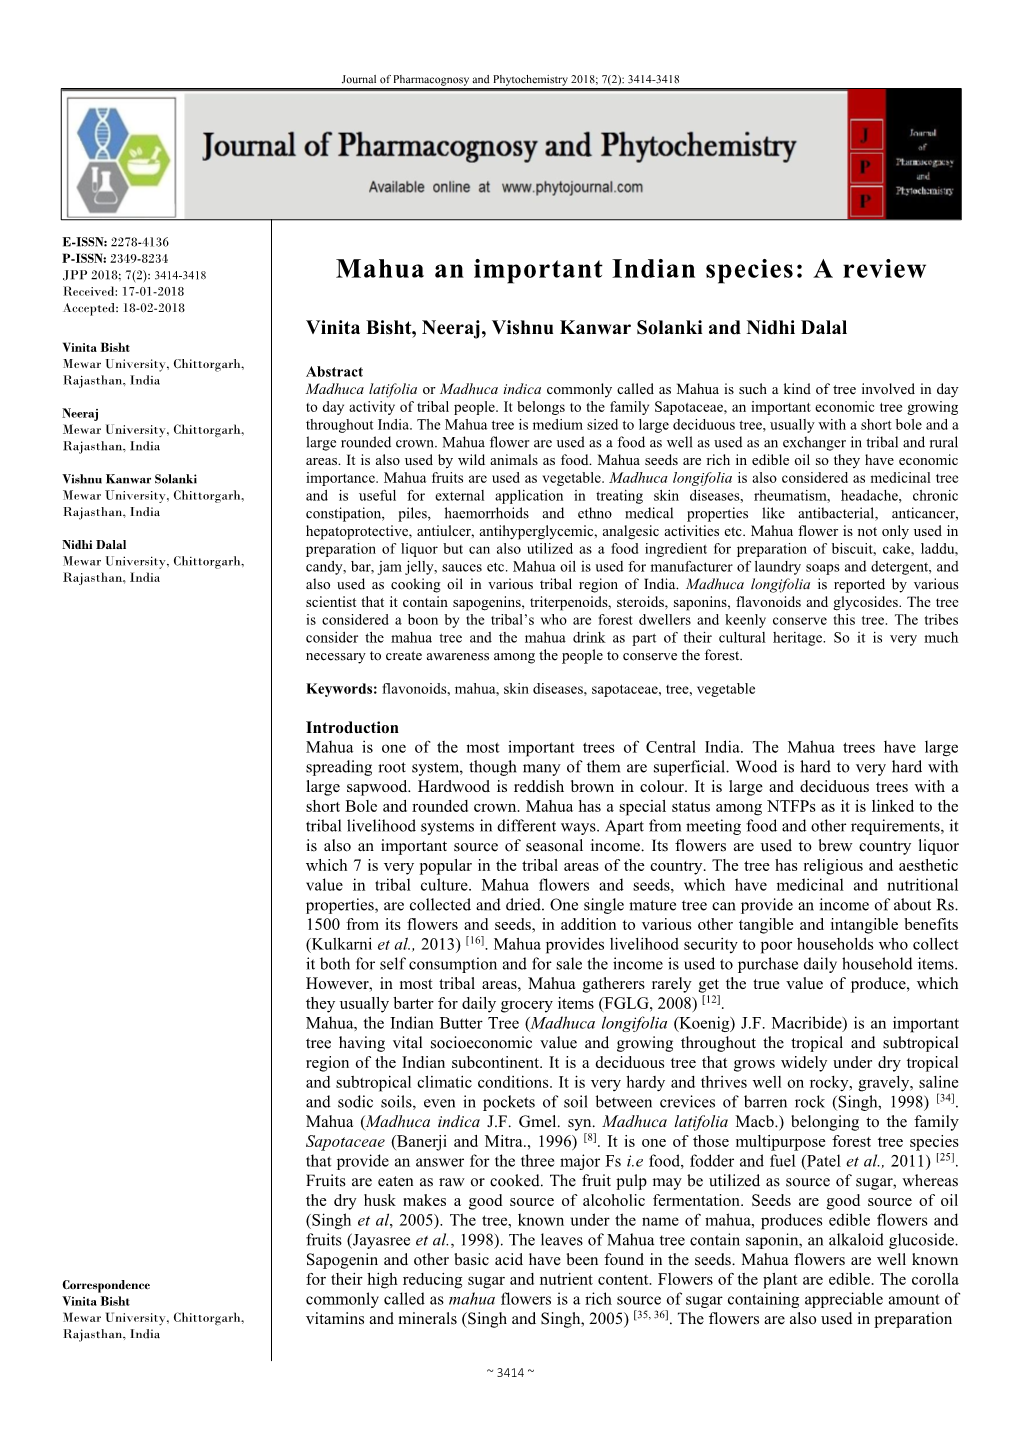 Mahua an Important Indian Species: a Review